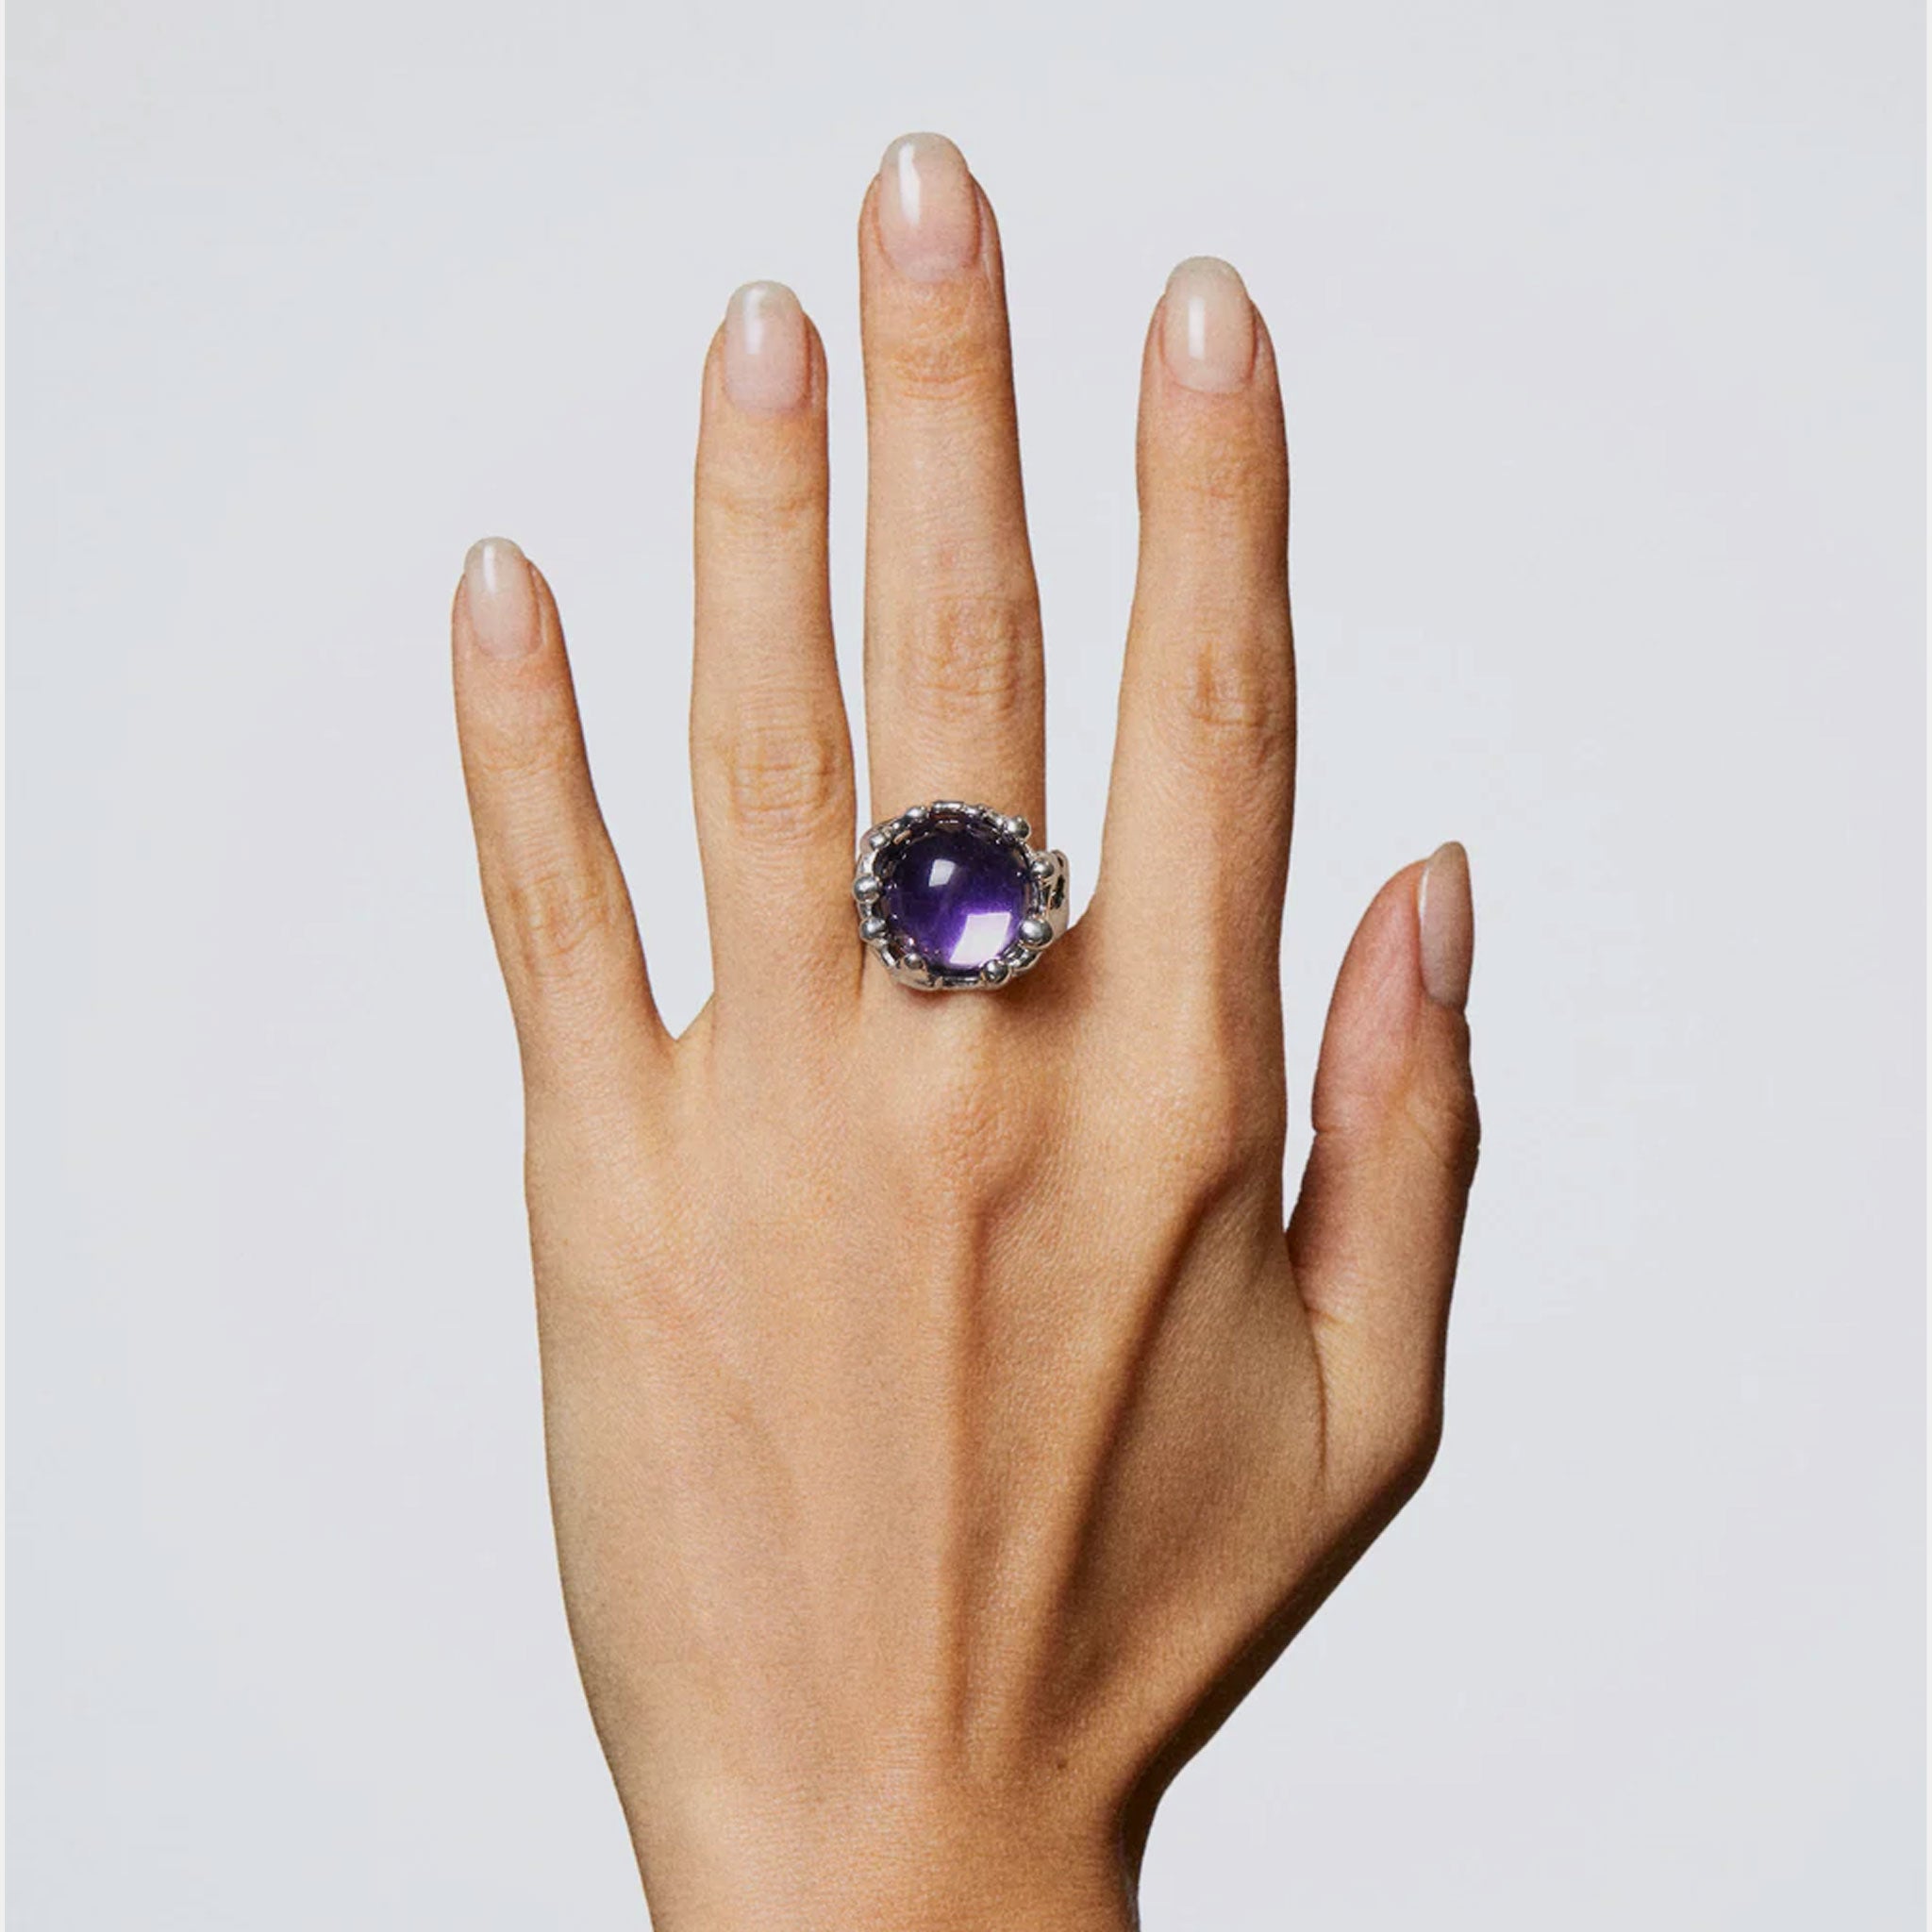 A model wears the circular silver-colored Magician Ring featuring a large round purple stone.